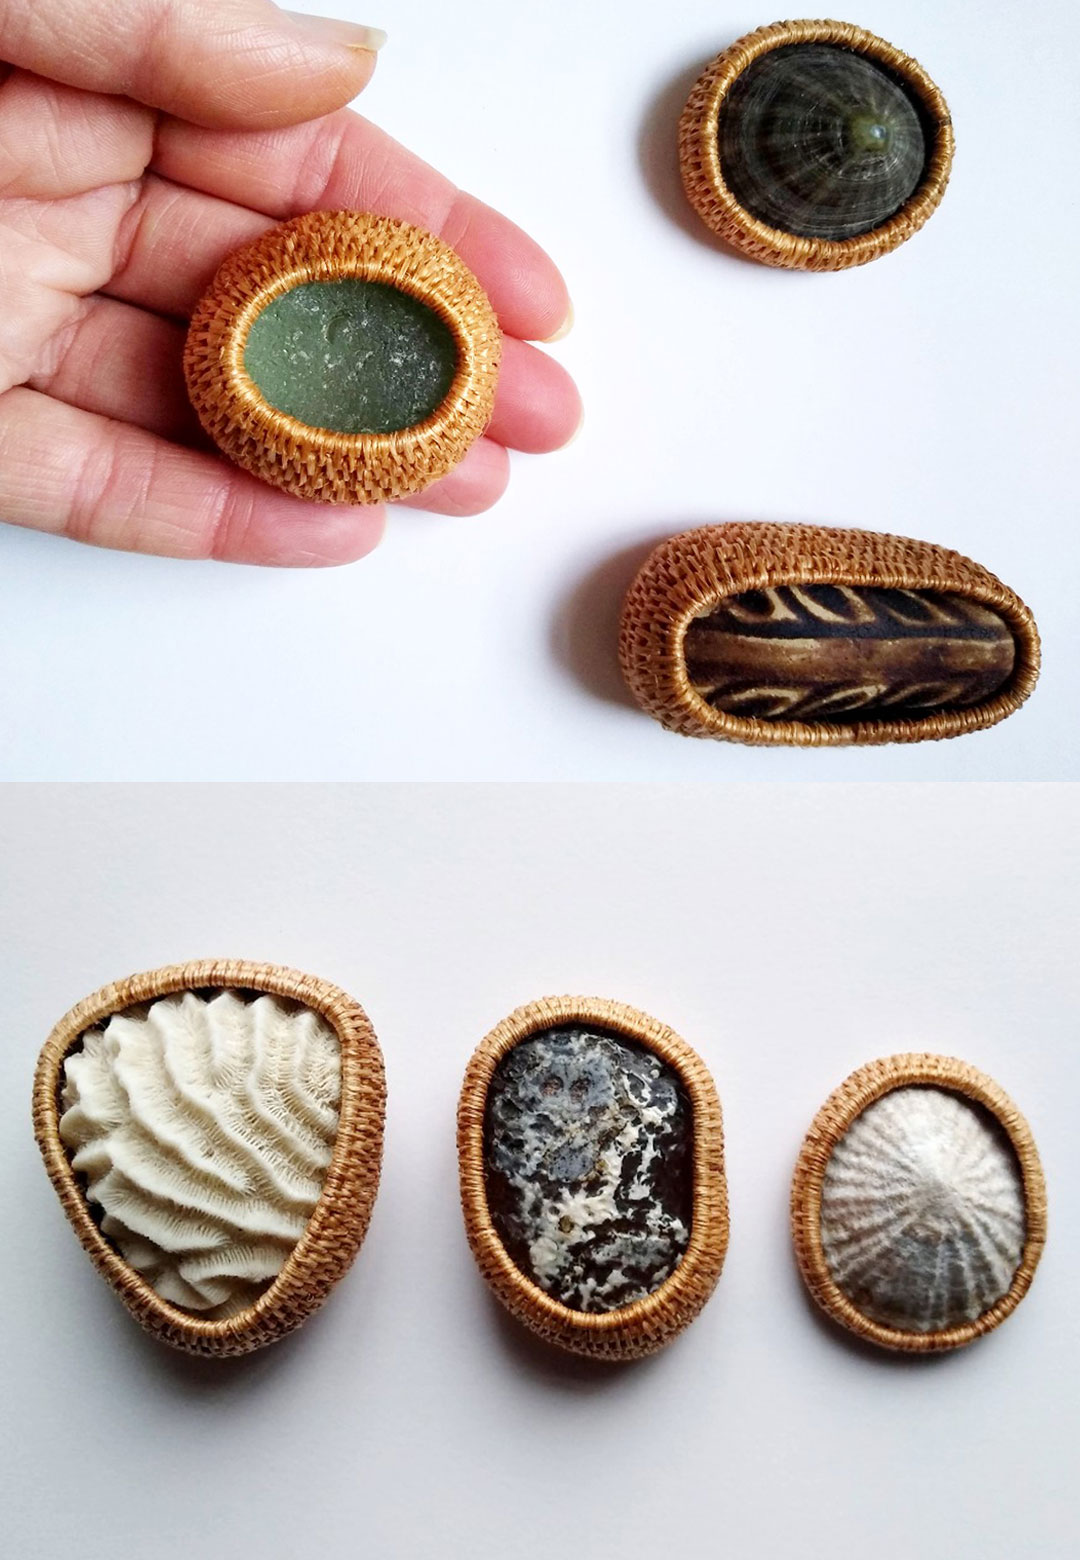 Jane Haselden’s plant fibre baskets cocoon shells, stones and earthenware